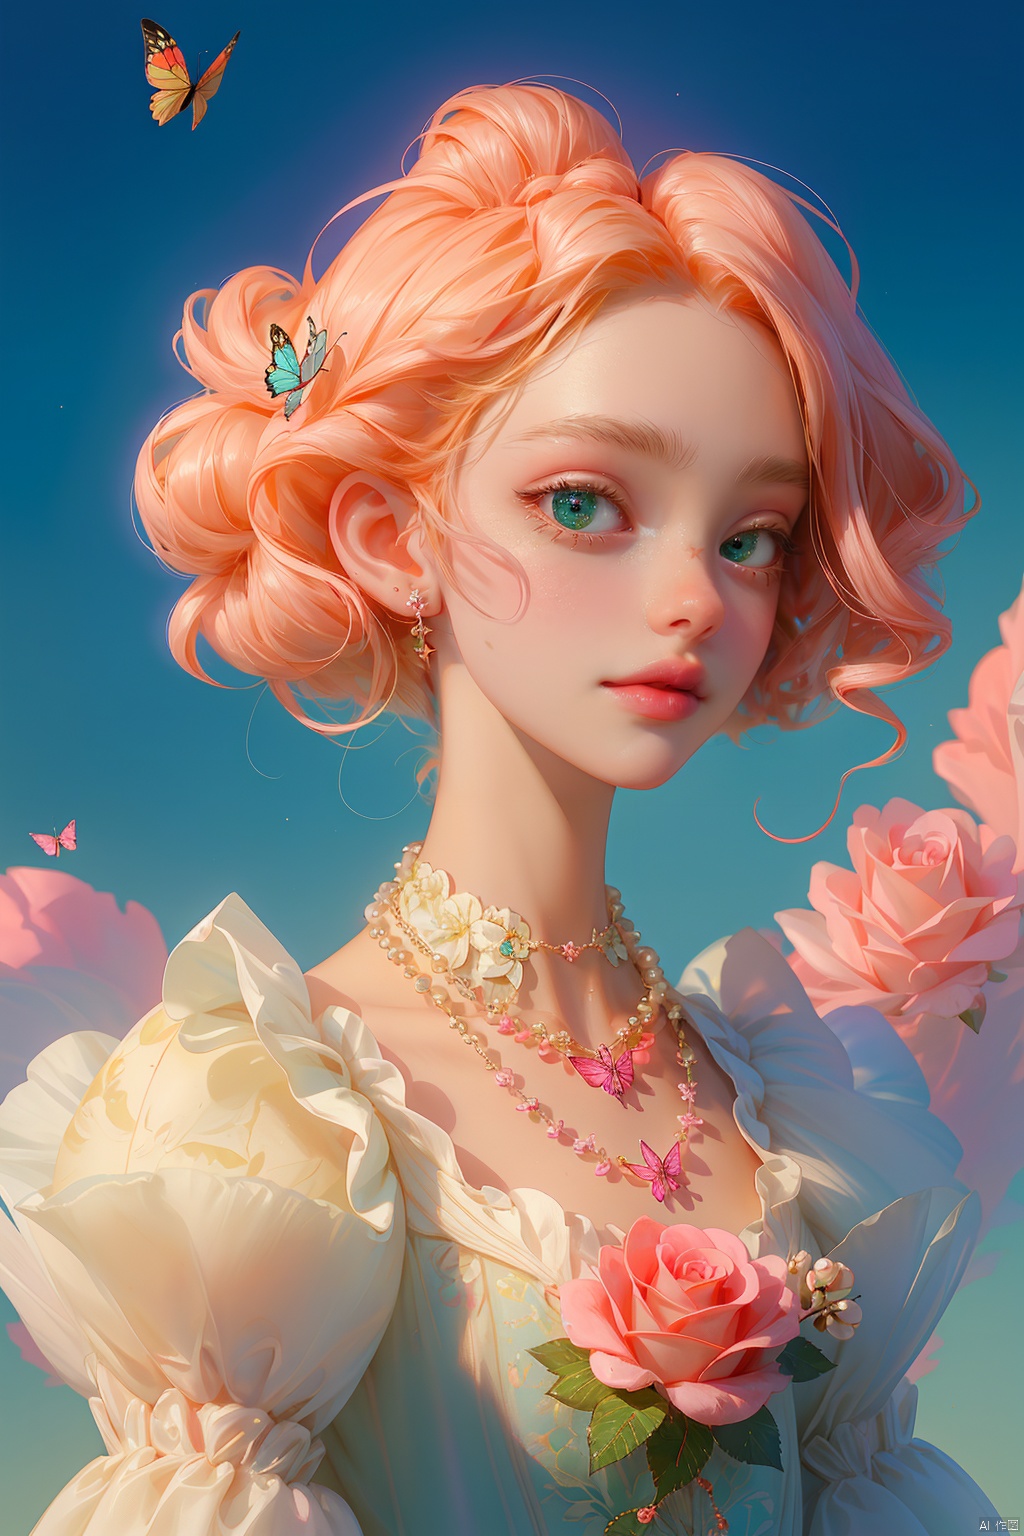  quality, 8K, extremely complex details, 1girl, lolita, careful eyes, looking_at_viewer, butterfly, gradient art, in the flower cluster, (rose:1.1), sky, (white cloud:0.9), full_shot, necklace, pearls andjewels, 